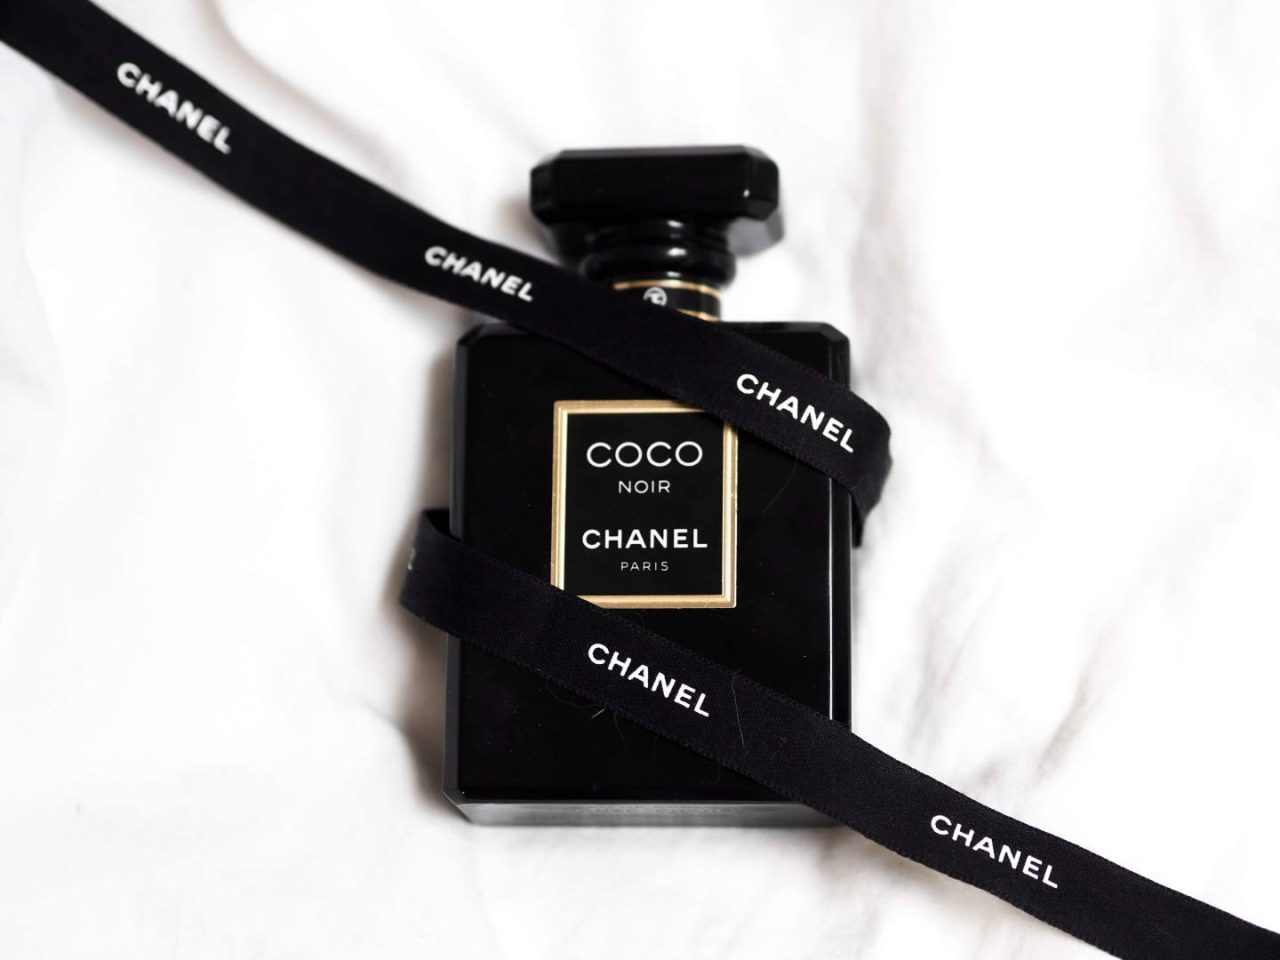 Chanel Image for Image Advertising